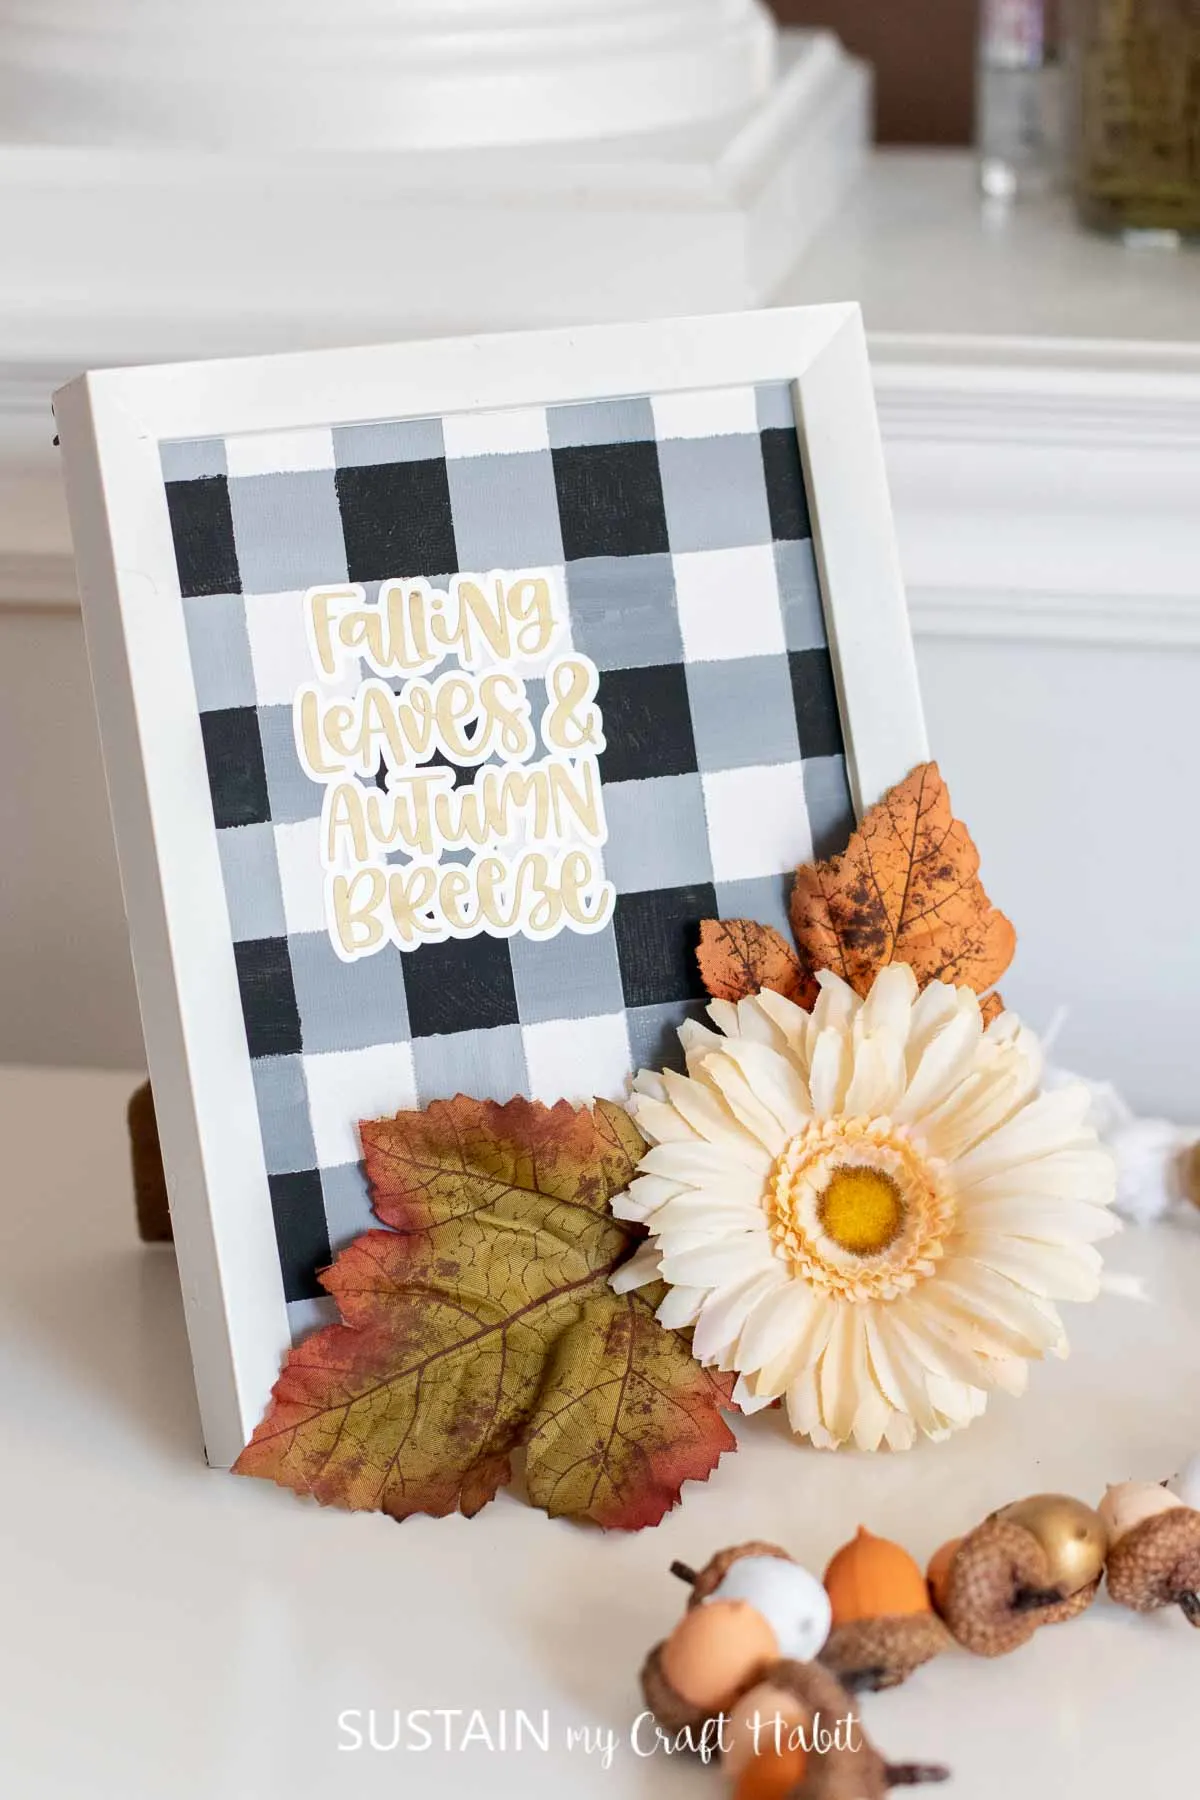 Painted buffalo plaid pattern in a frame with a "falling leaves and autumn breeze" cut out phrase and faux flowers and leaves.